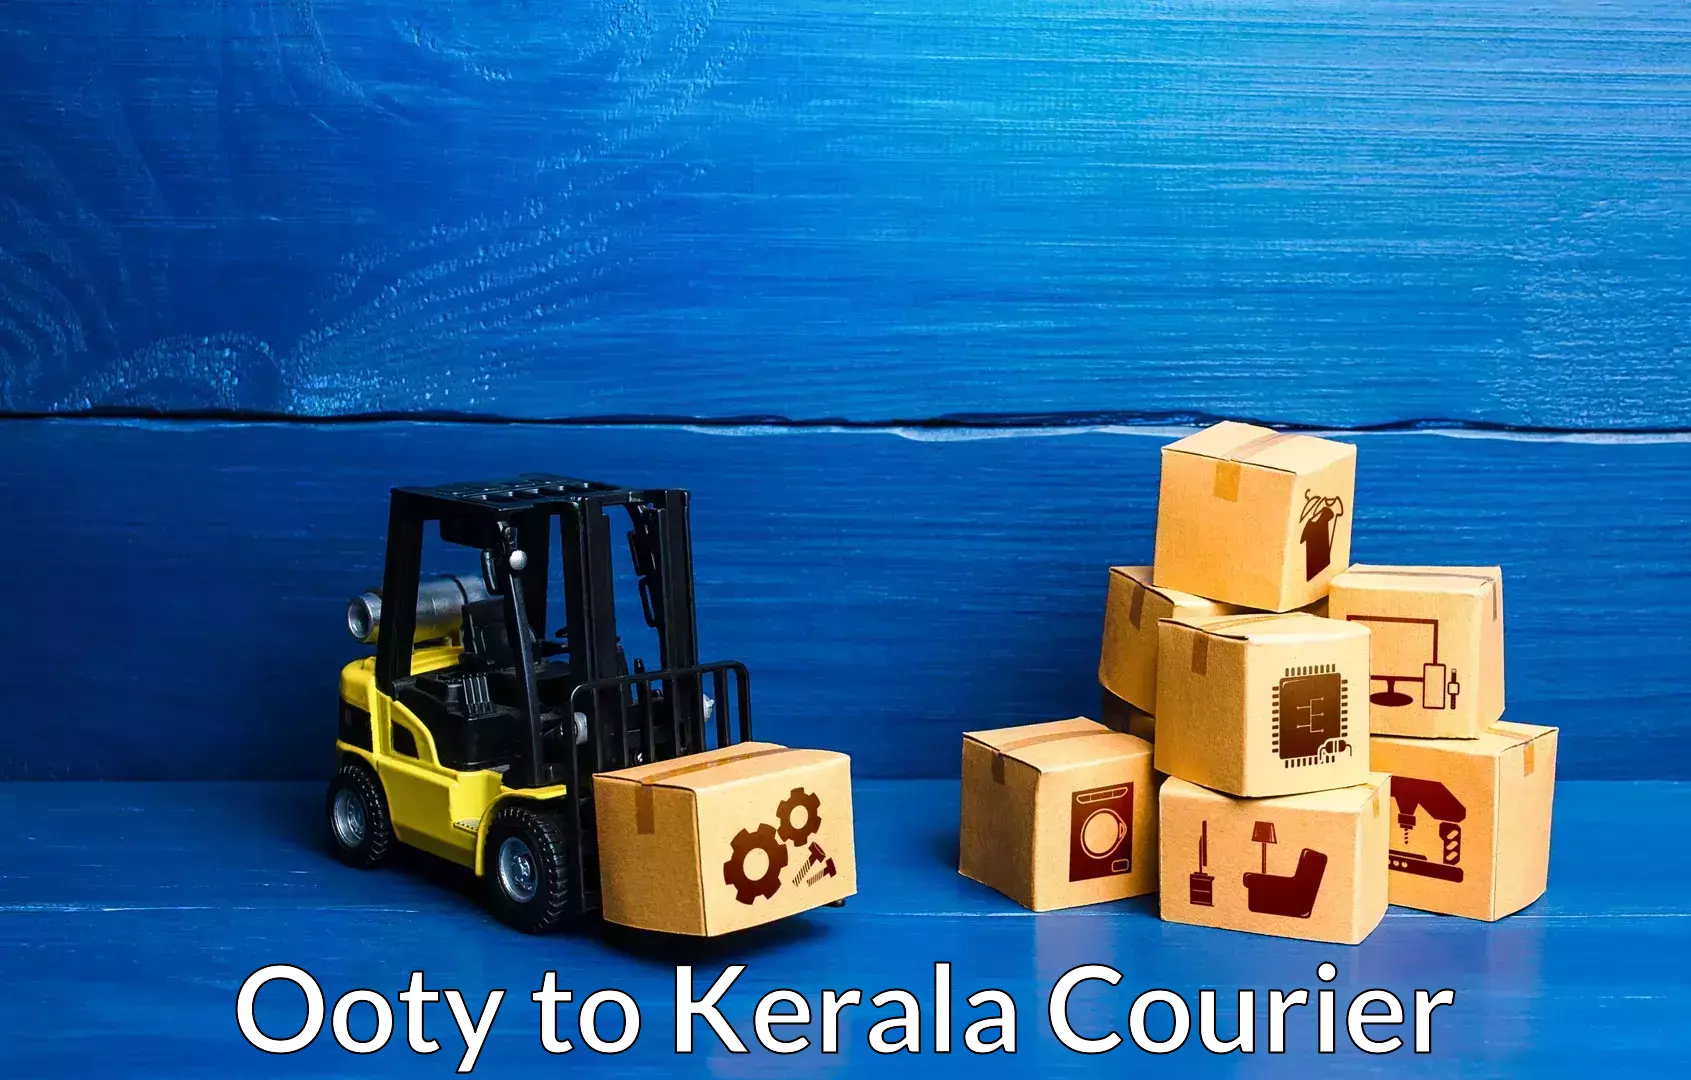 Furniture transport company Ooty to Parippally